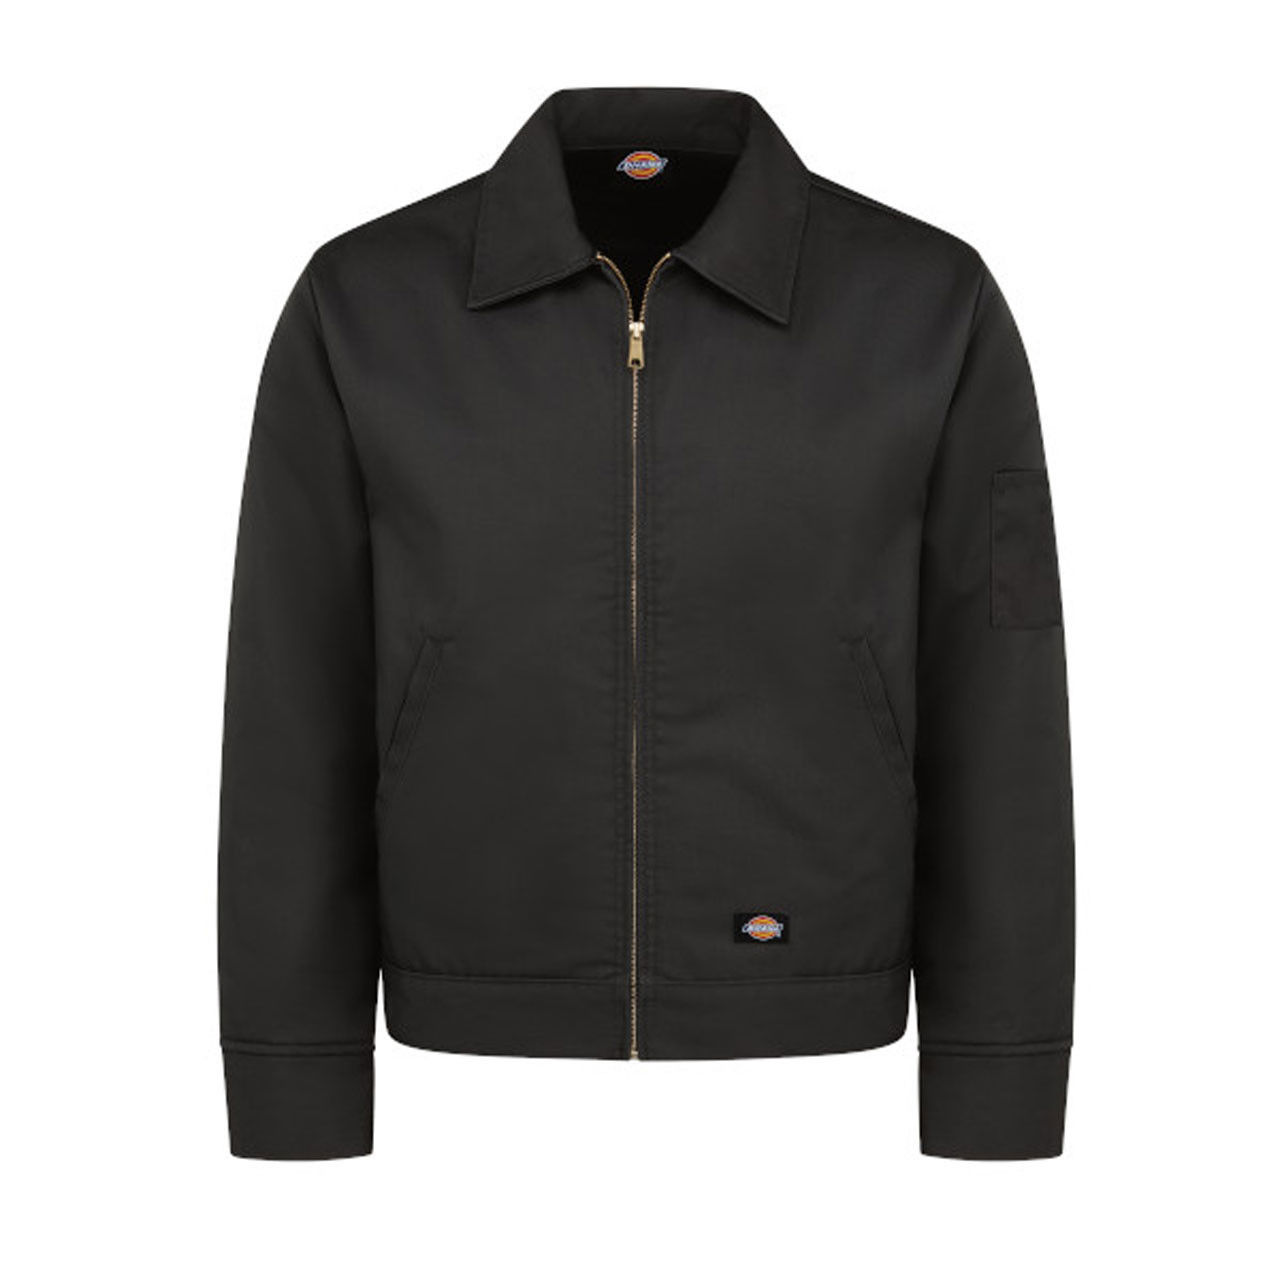 Can the black Dickies jacket handle an industrial wash?